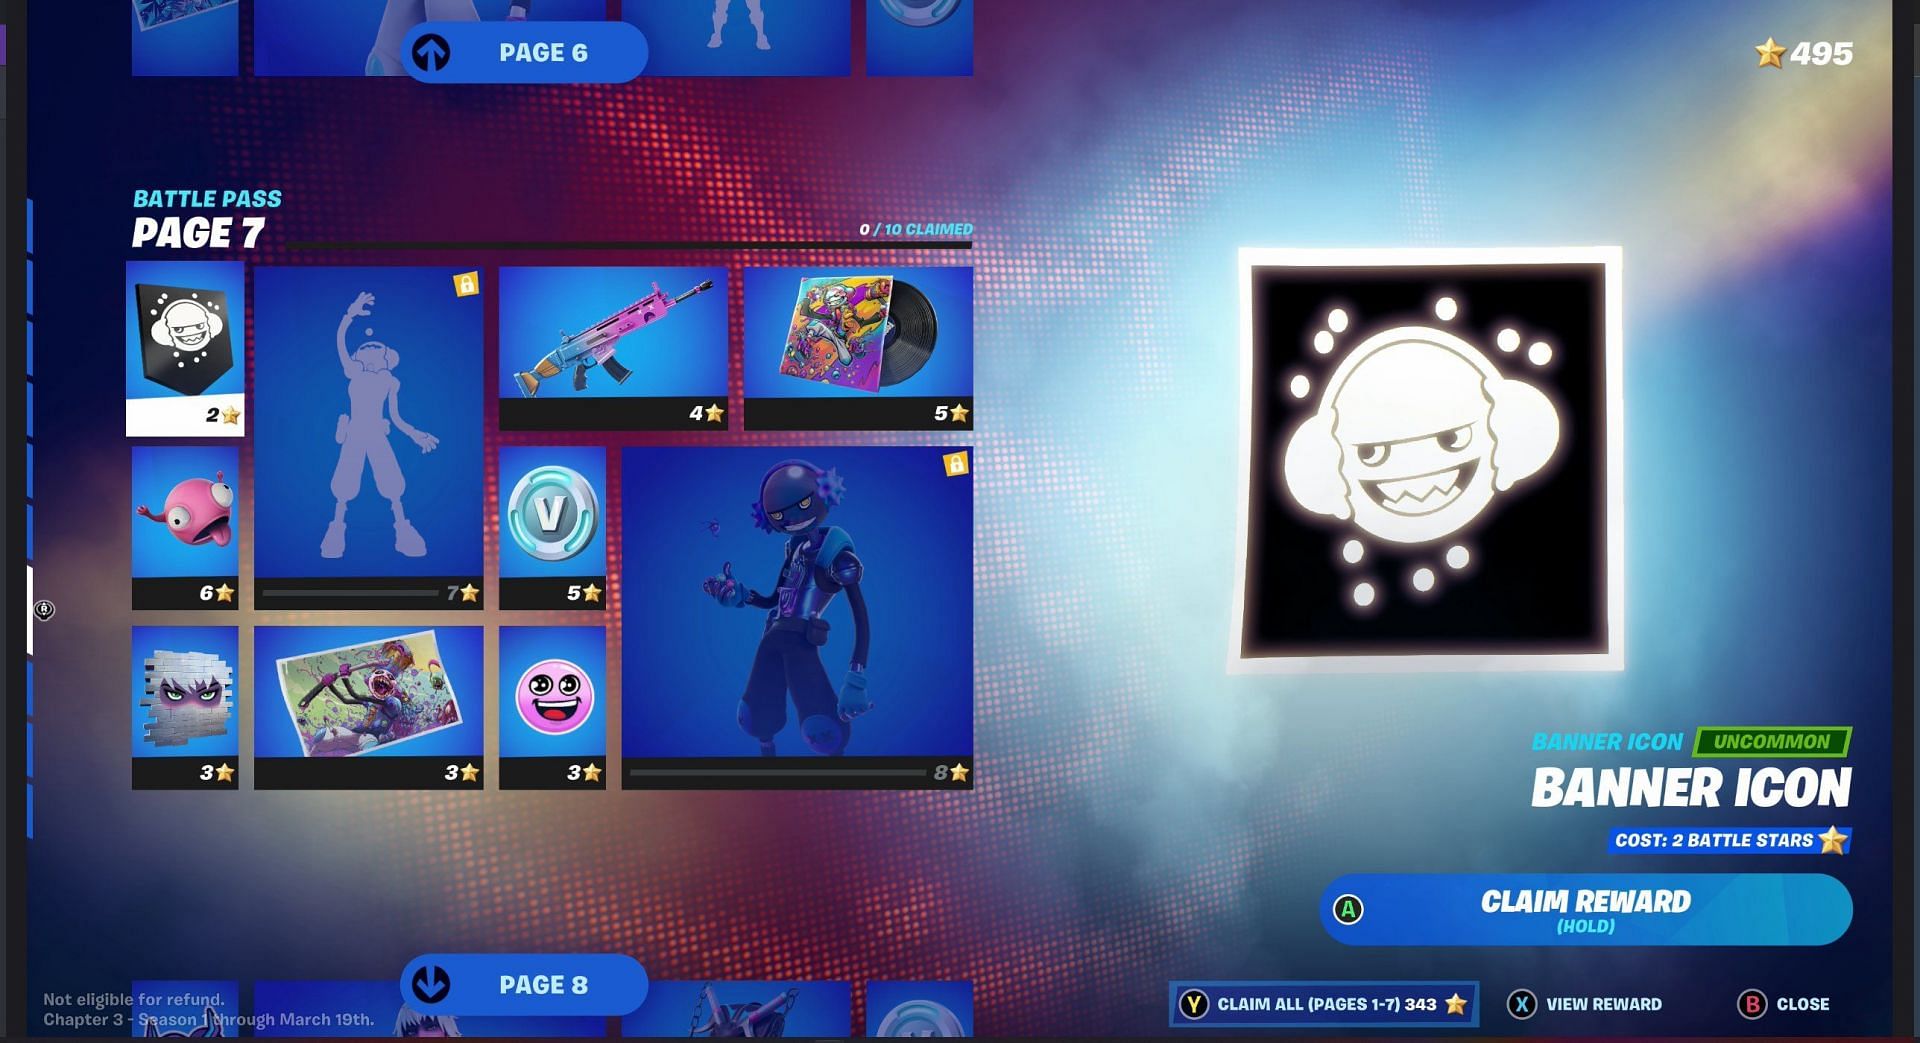 Page 7 of the Battle Pass (Image via Fortnite)